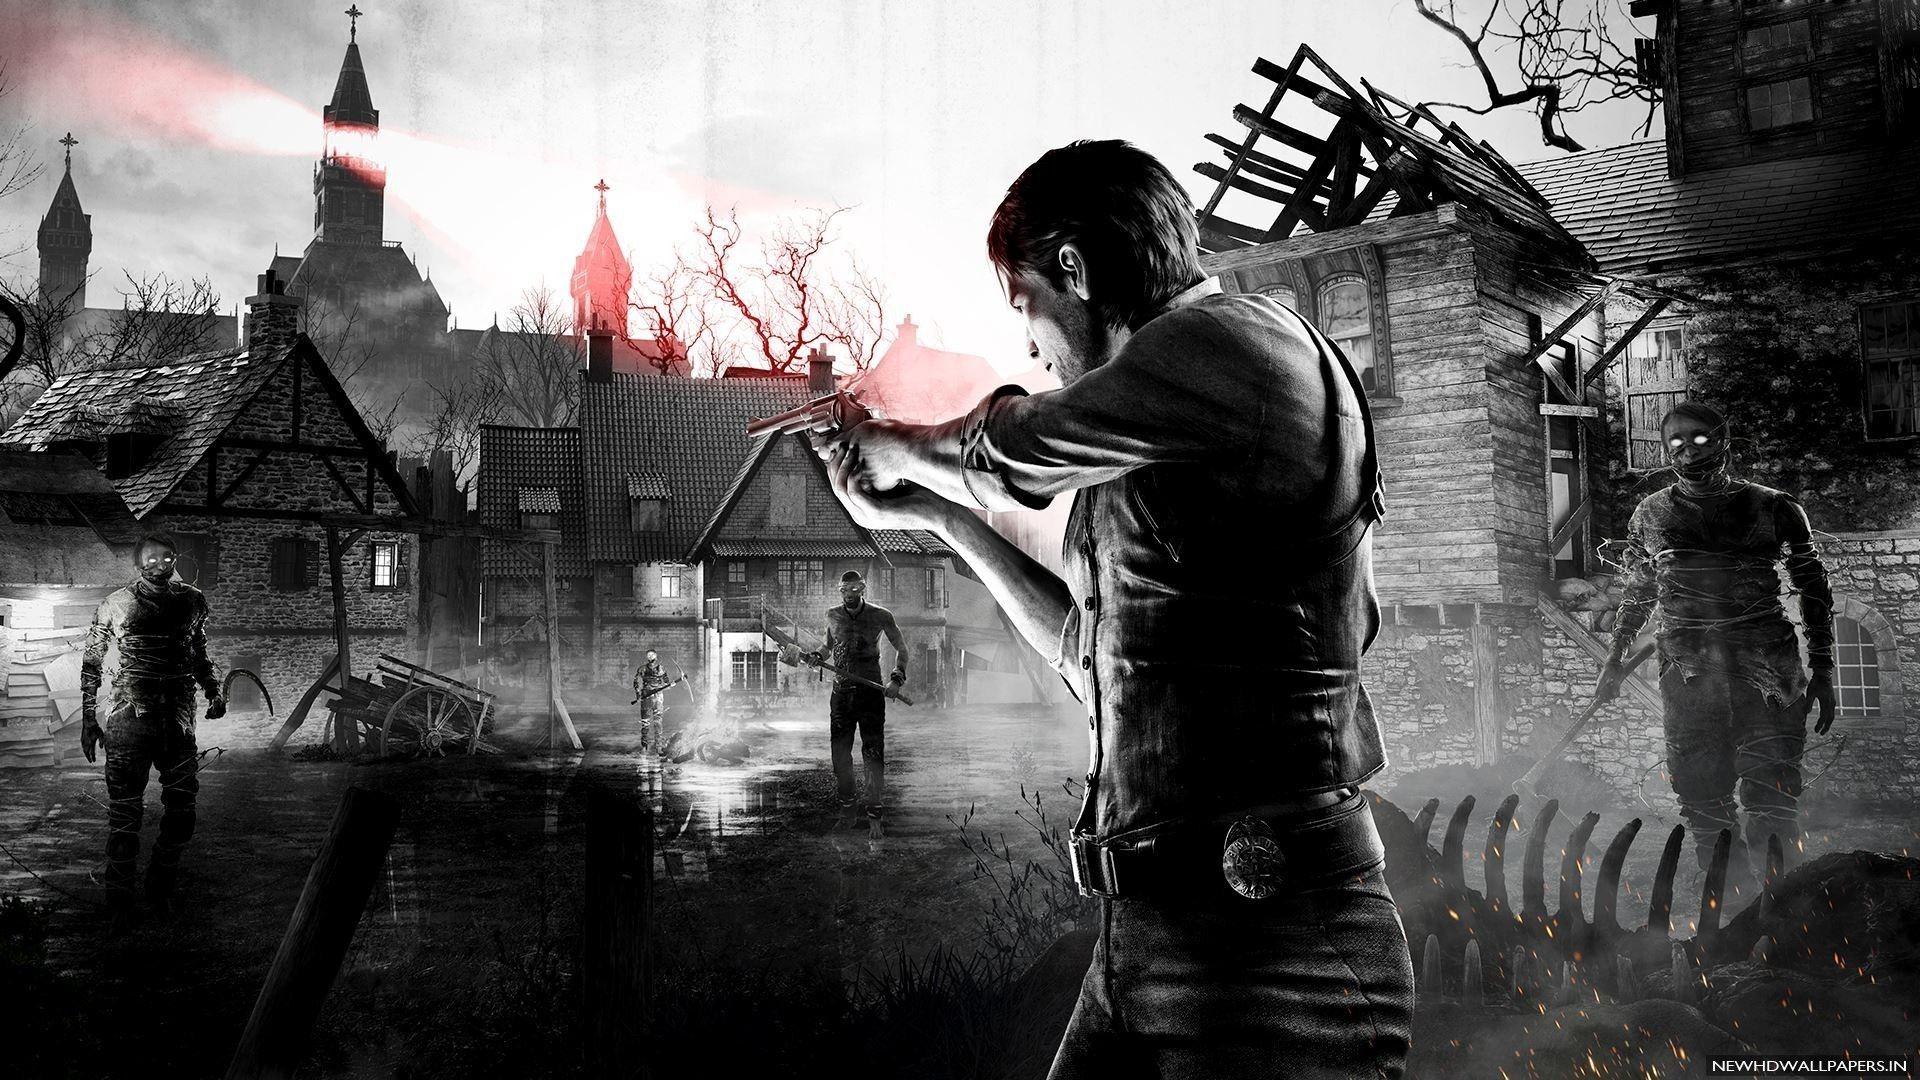 The Evil Within Wallpapers, The Evil Within Wallpapers.